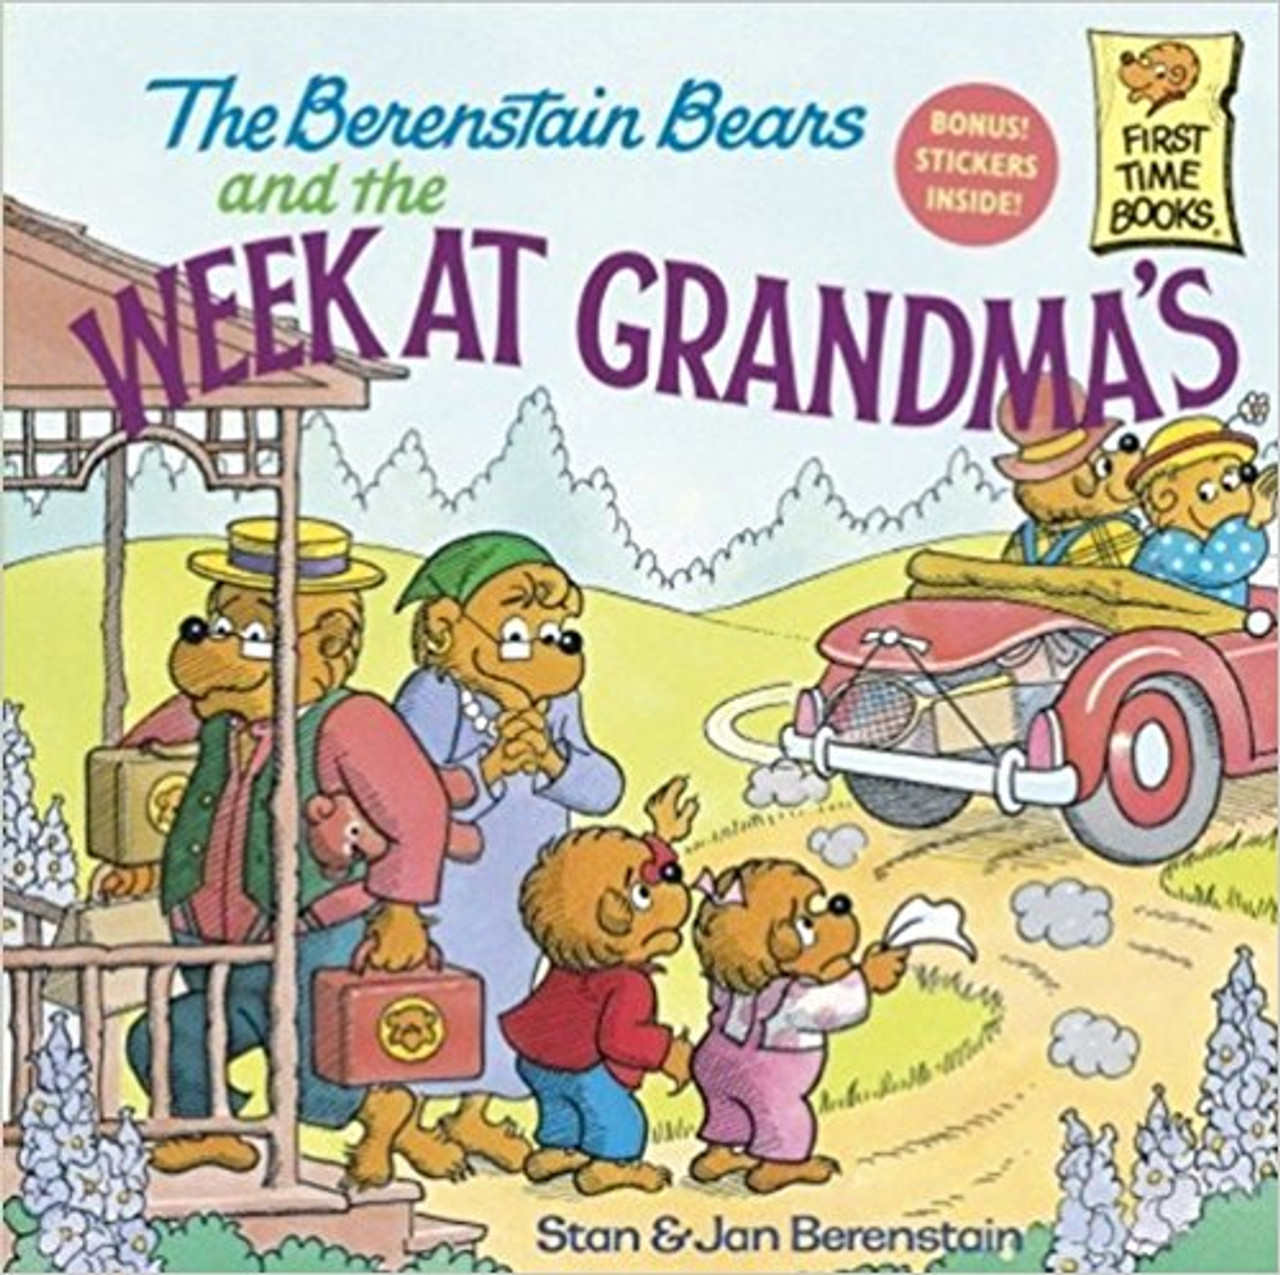  Brother and Sister worry about spending a week at Gran and Gramp's house. By the end of the visit they've learned a lot from their lively grandparents--and the older bears have discovered how wonderful it is to be grandparents.